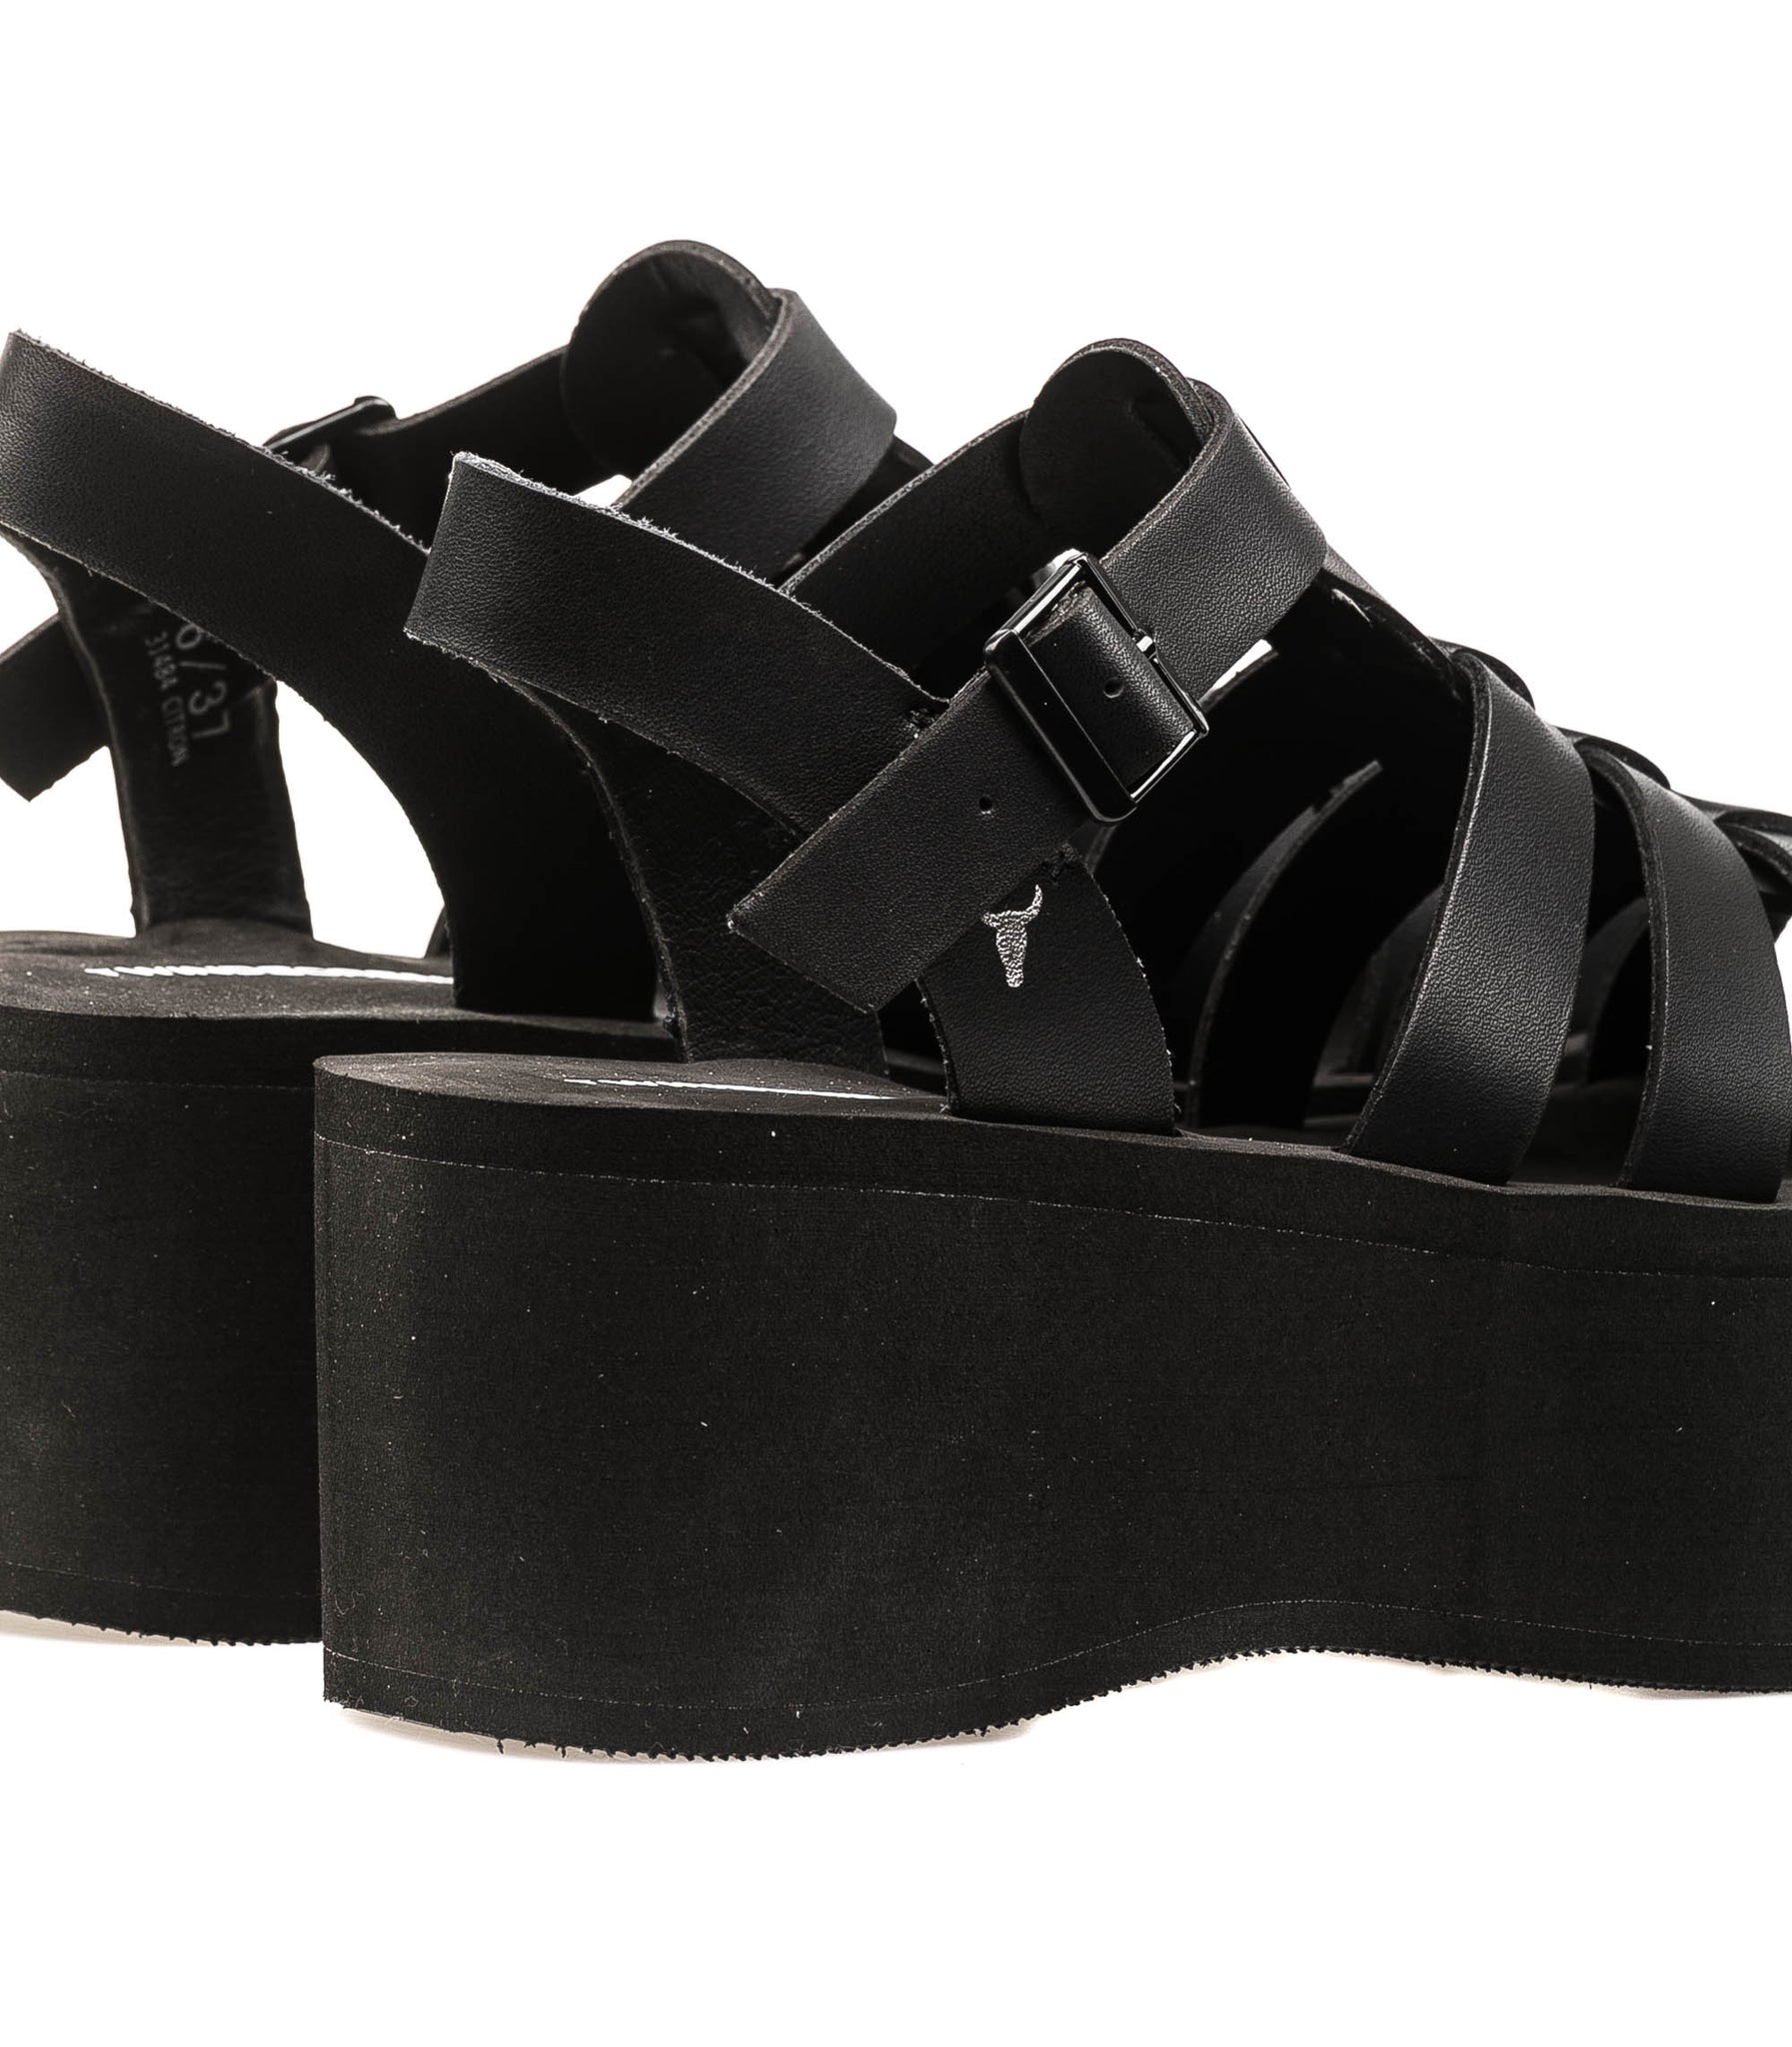 Windsorsmith Smooth Action Sandals Black Women